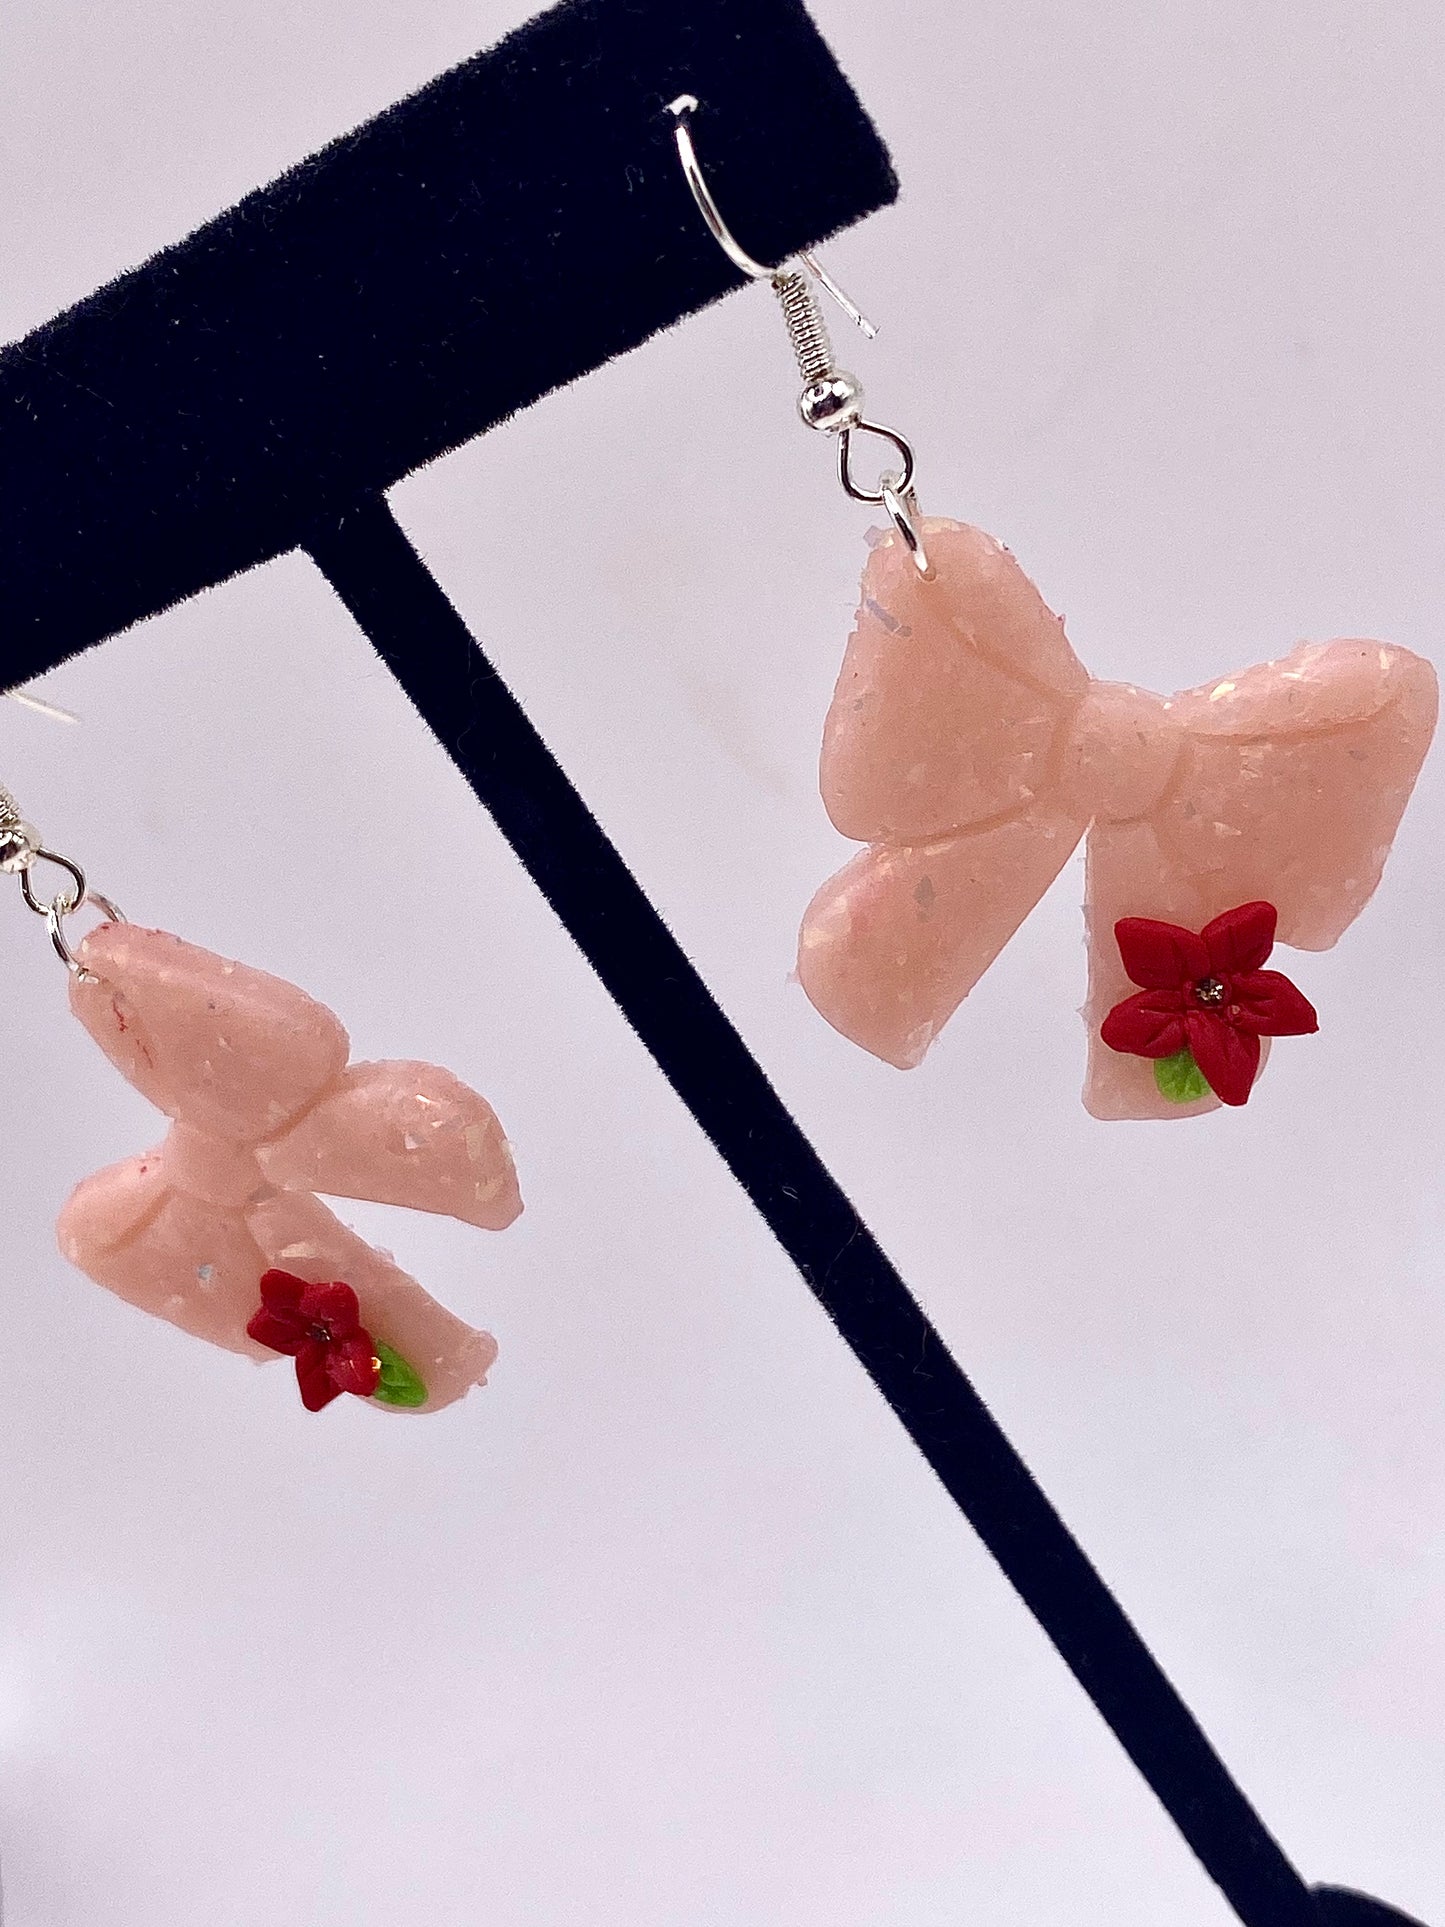 Pink Bow with Red Flowers Earrings 004